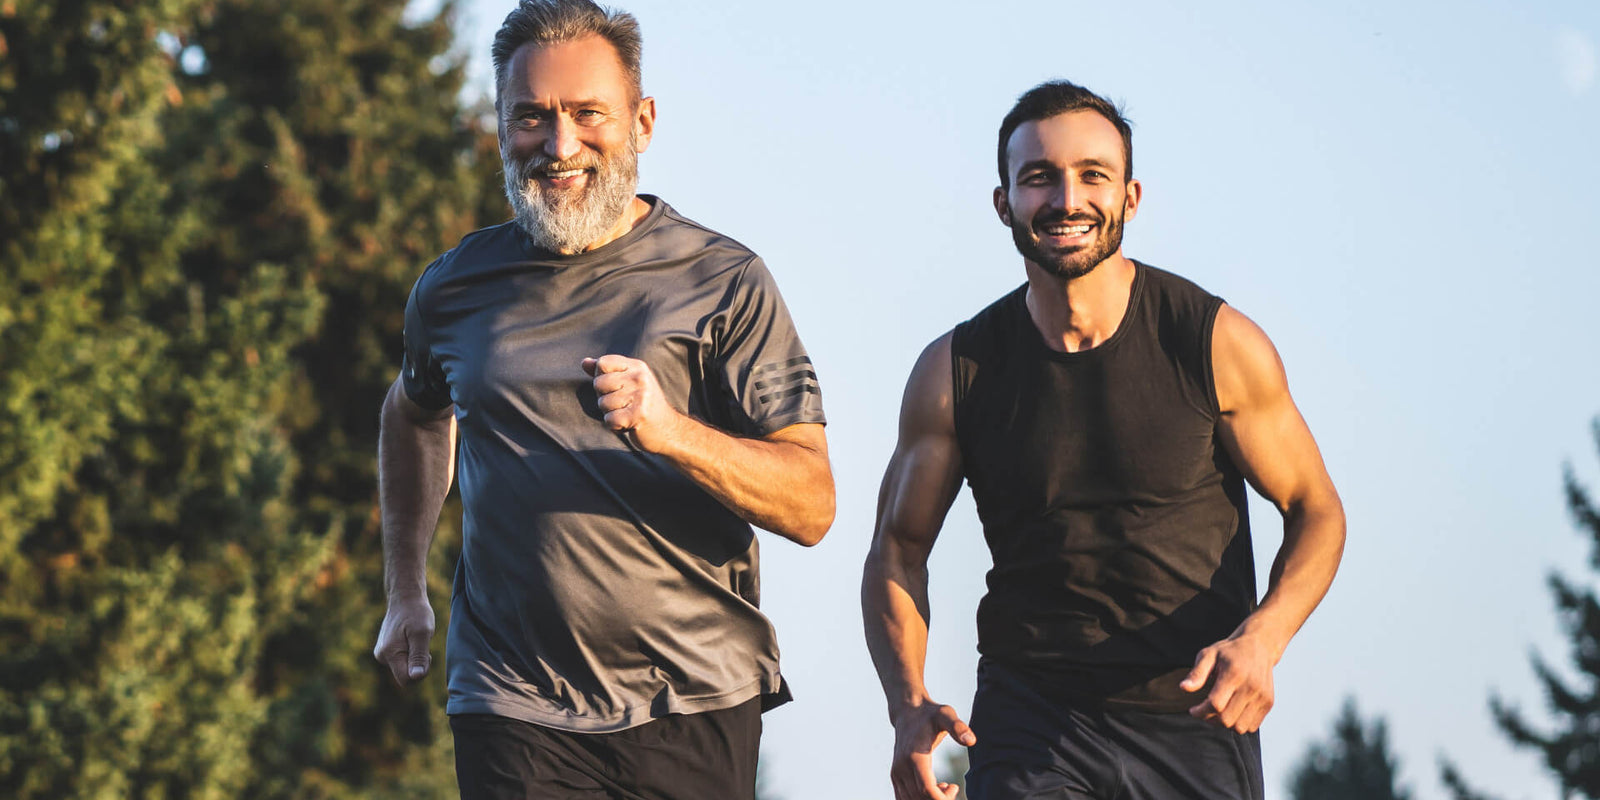 men running to boost energy levels naturally